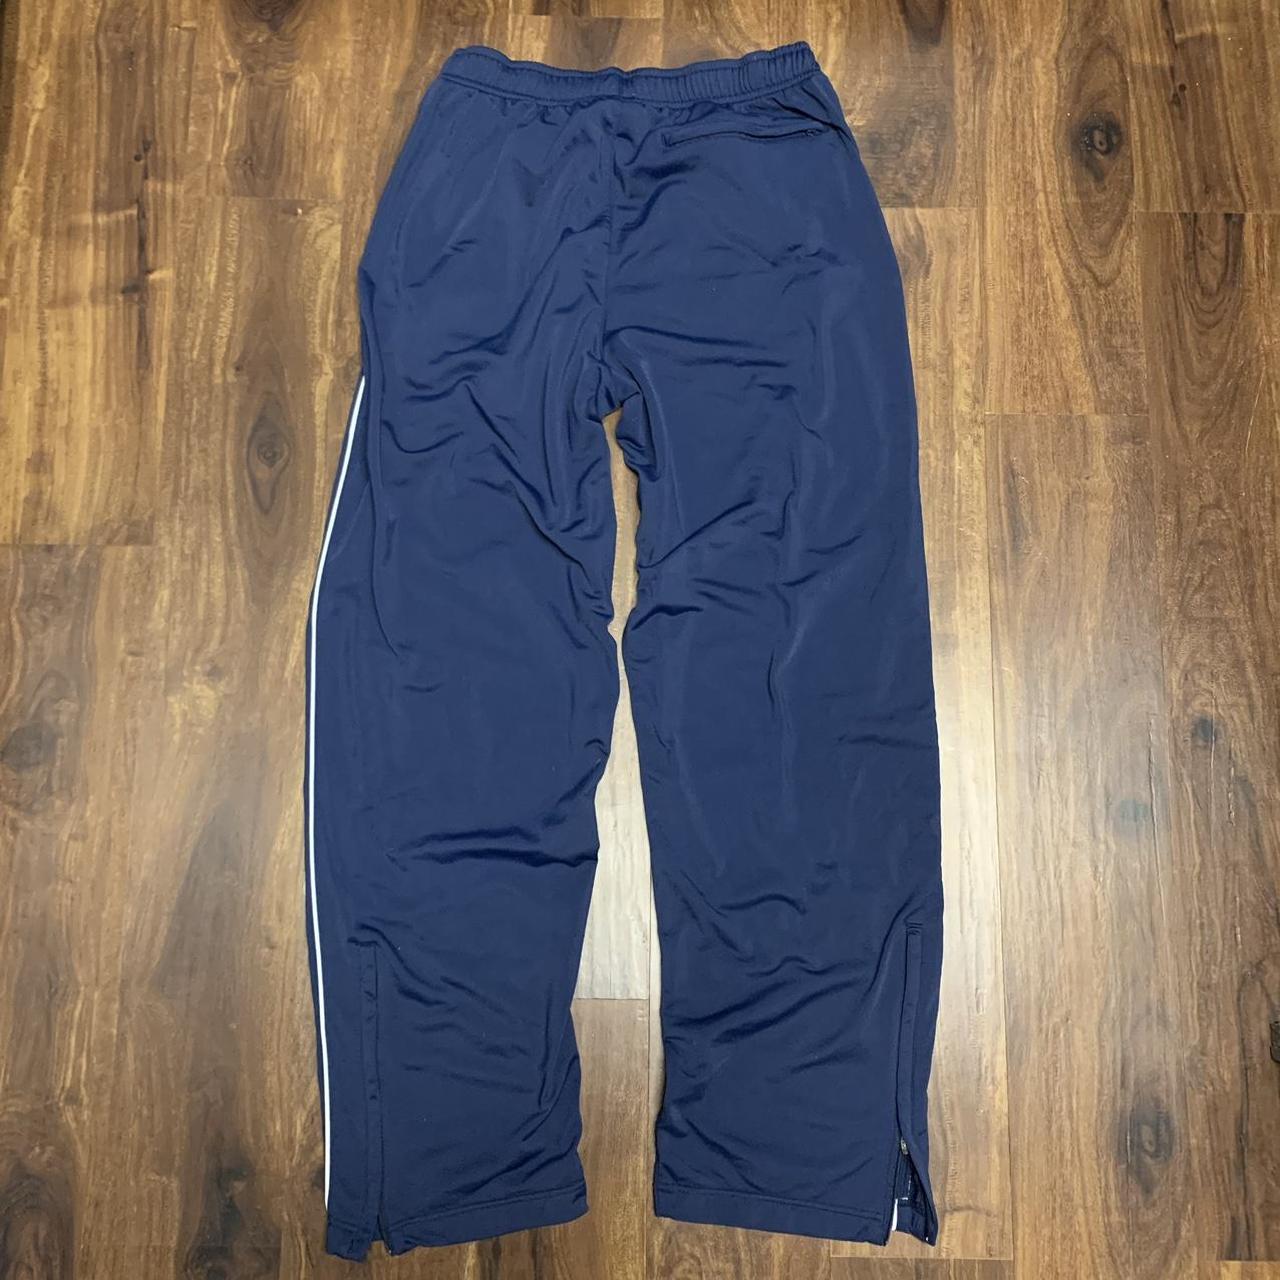 Nike Men's Navy and White Joggers-tracksuits (3)